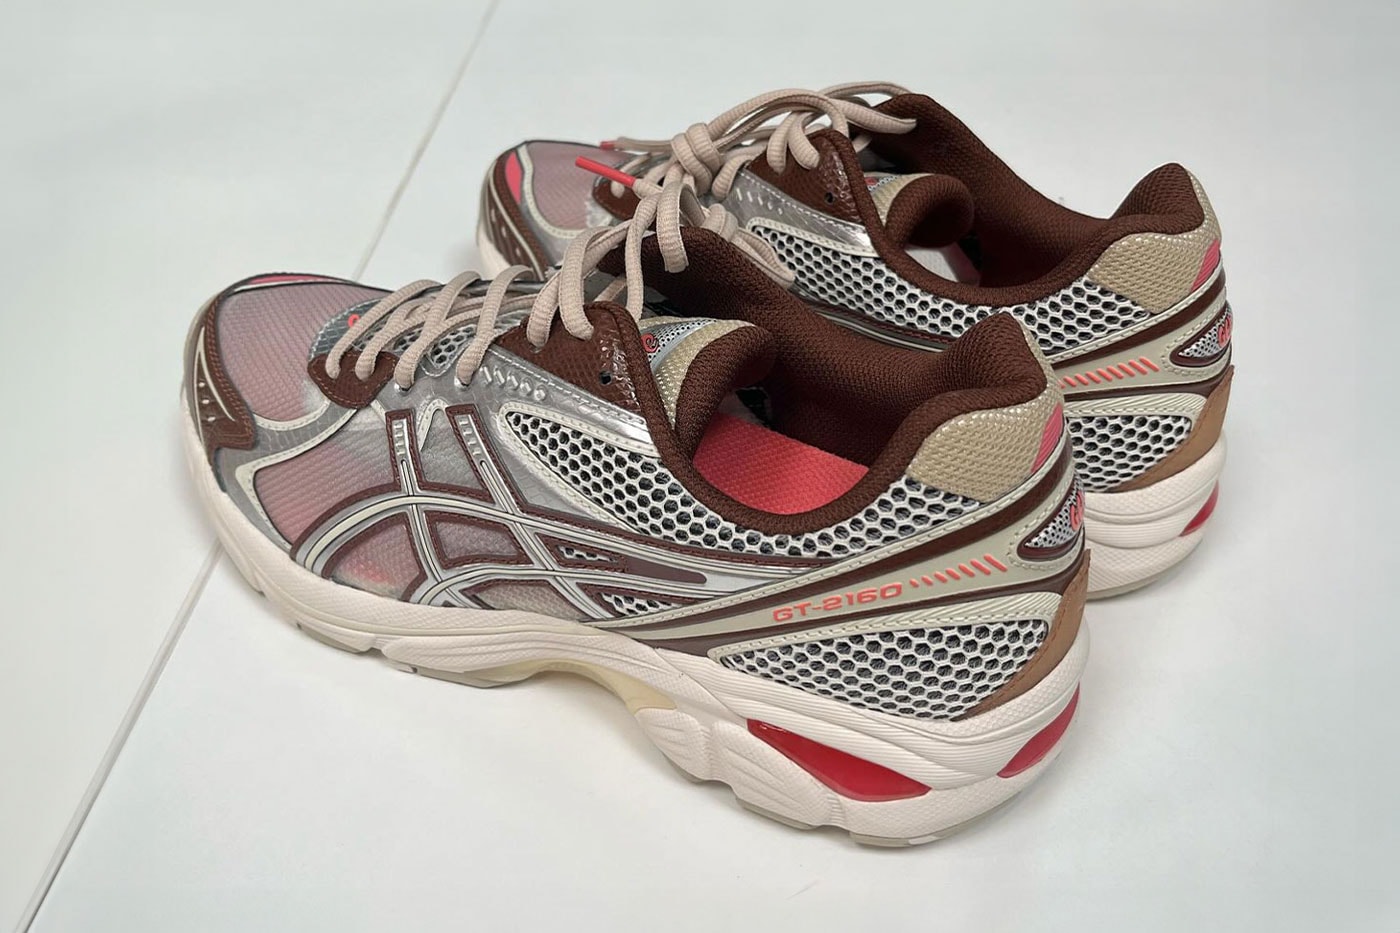 First Look Above the Clouds x ASICS GT-2160 Colorway Info